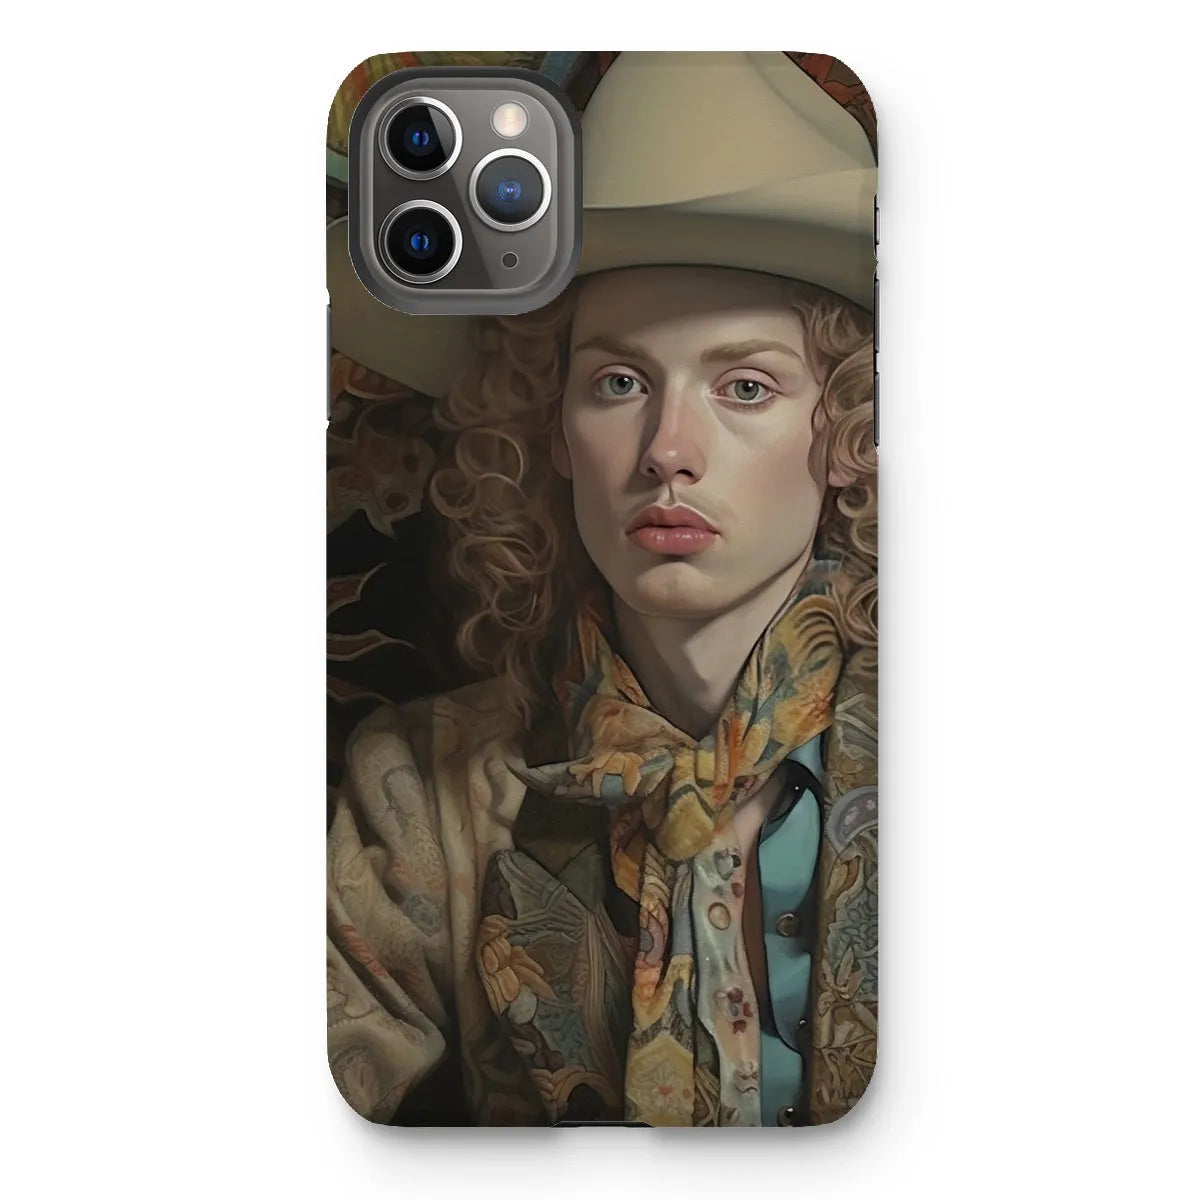 Ollie The Transgender Cowboy - F2m Dandy Outlaw Phone Case - Iphone 11 Pro Max / Matte - Mobile Phone Cases - Aesthetic